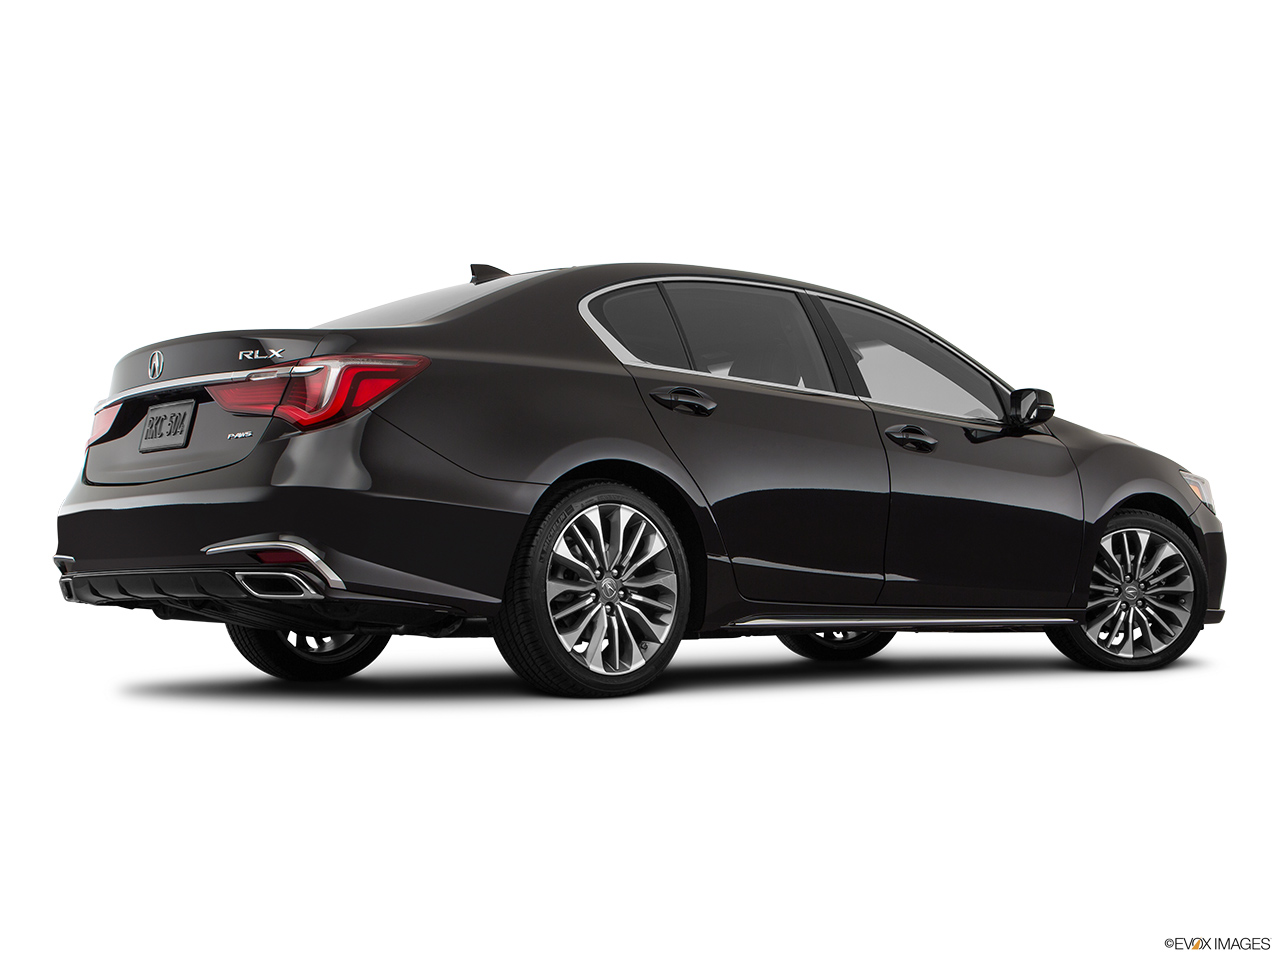 2018 Acura RLX Base Low/wide rear 5/8. 